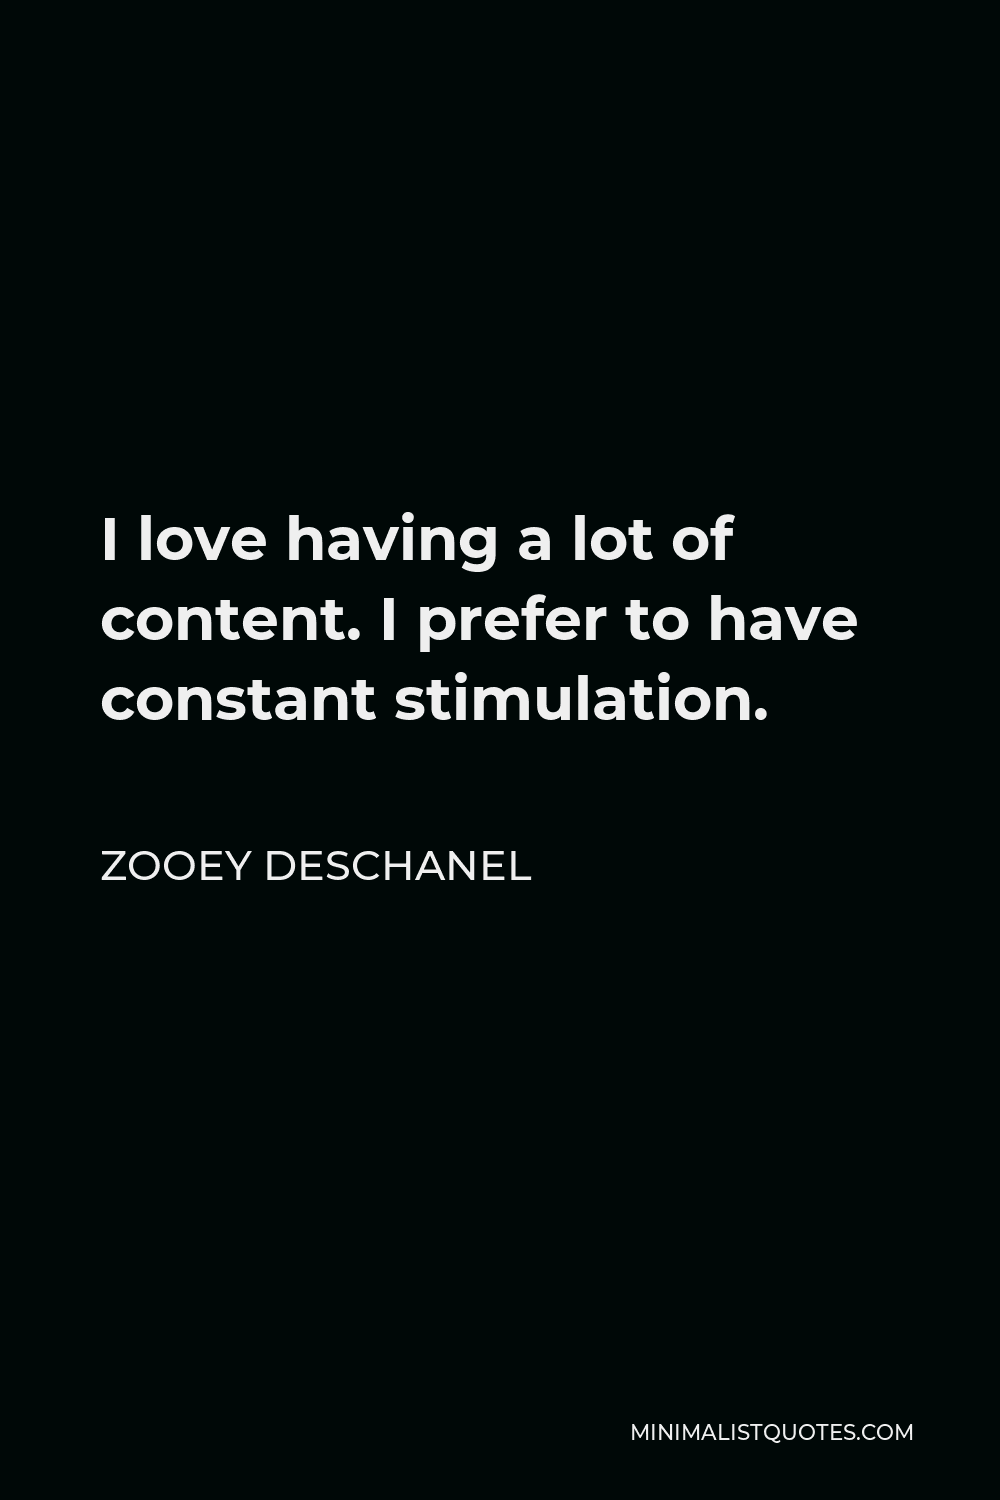 Zooey Deschanel Quote - I love having a lot of content. I prefer to have constant stimulation.